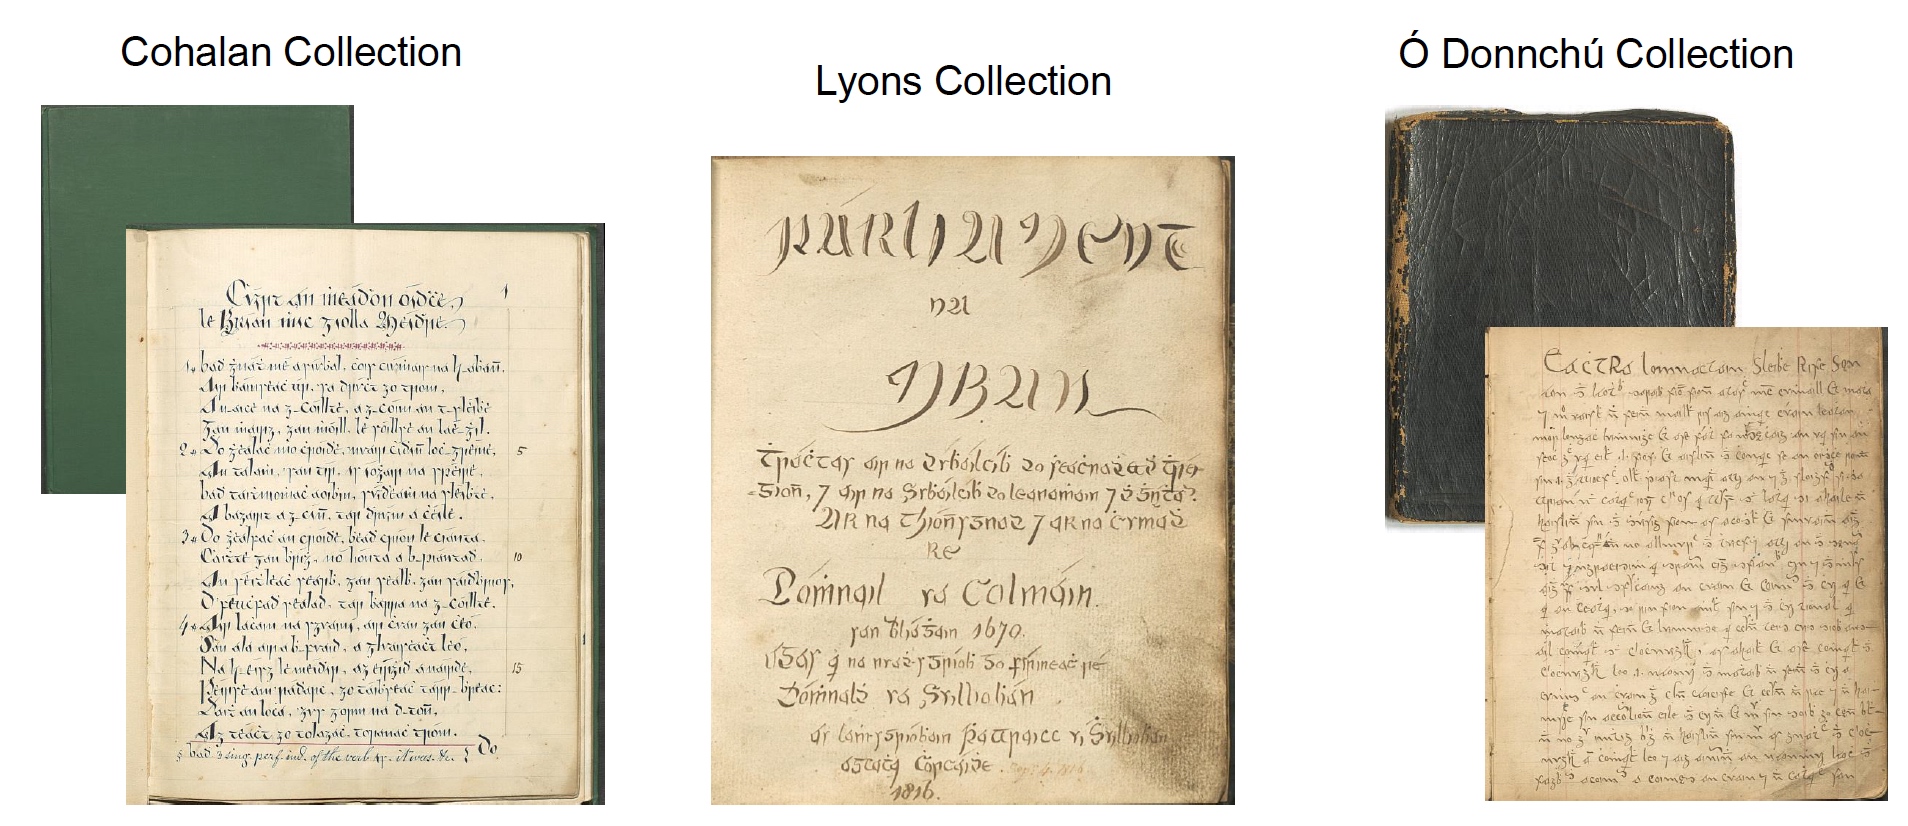 Three sets of images. On the left is a page from a Cohalan manuscript and behind it is a green cover. In the centre is a page 'Parliment na mBan' from a Lyons manuscript. On the right is a page from a O Donnchu manuscript and behind it is a black cover. 